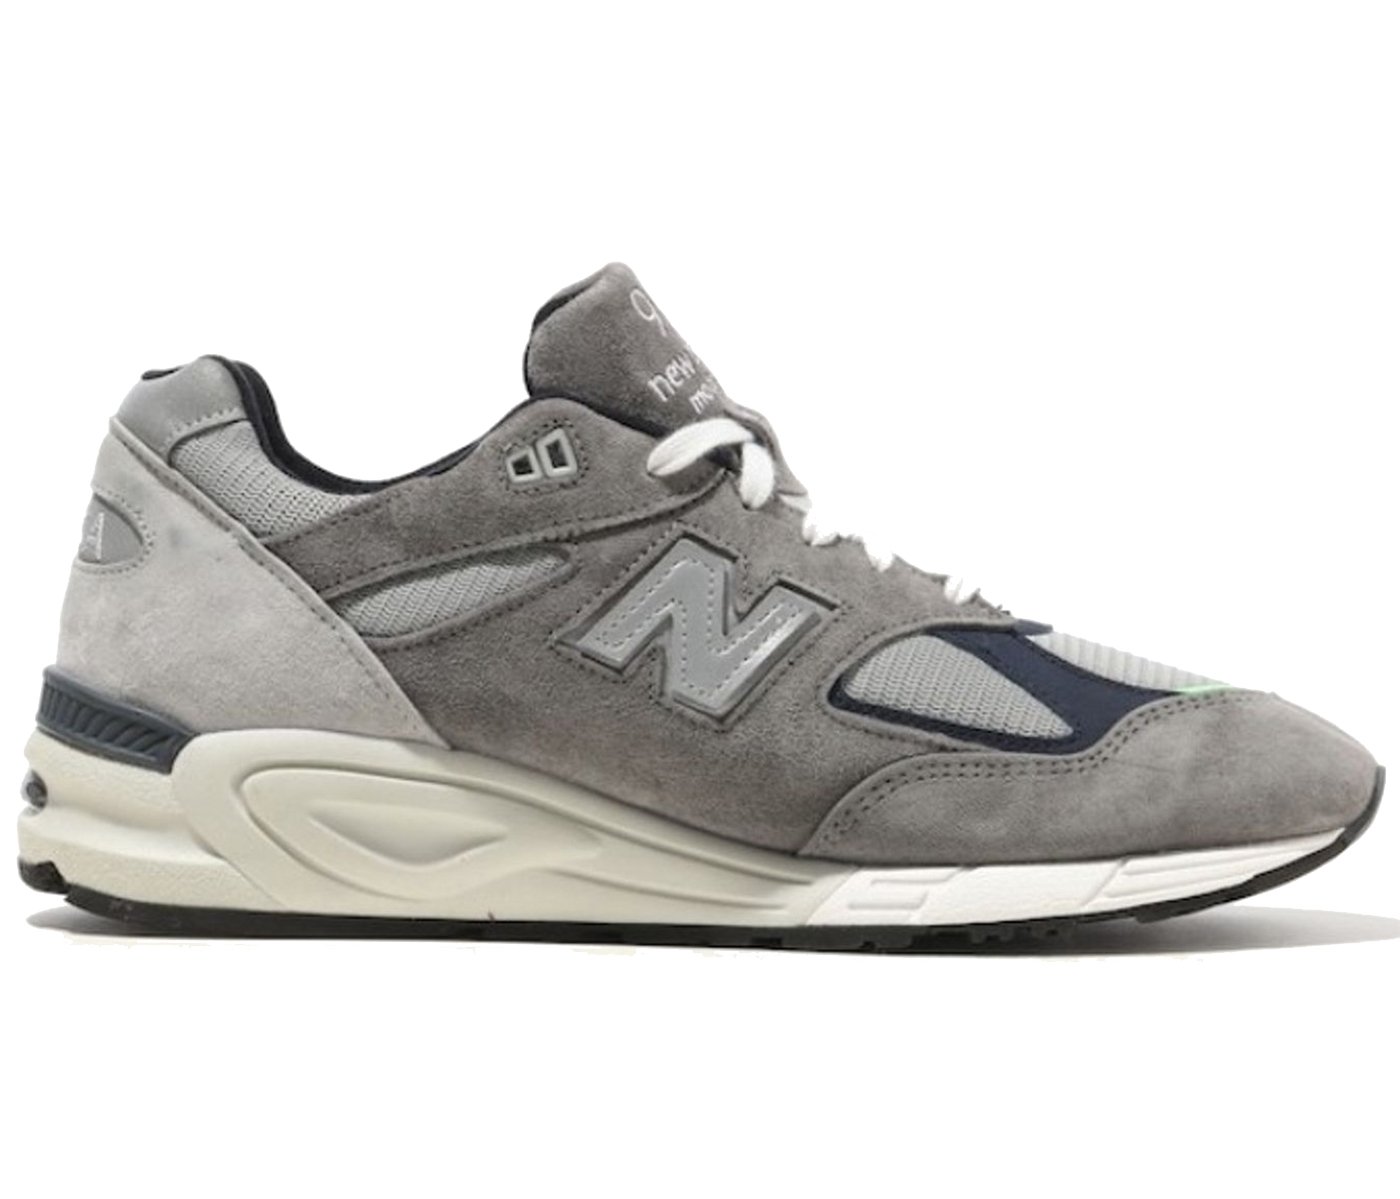 New Balance 990v2 Madness Grey sneakers